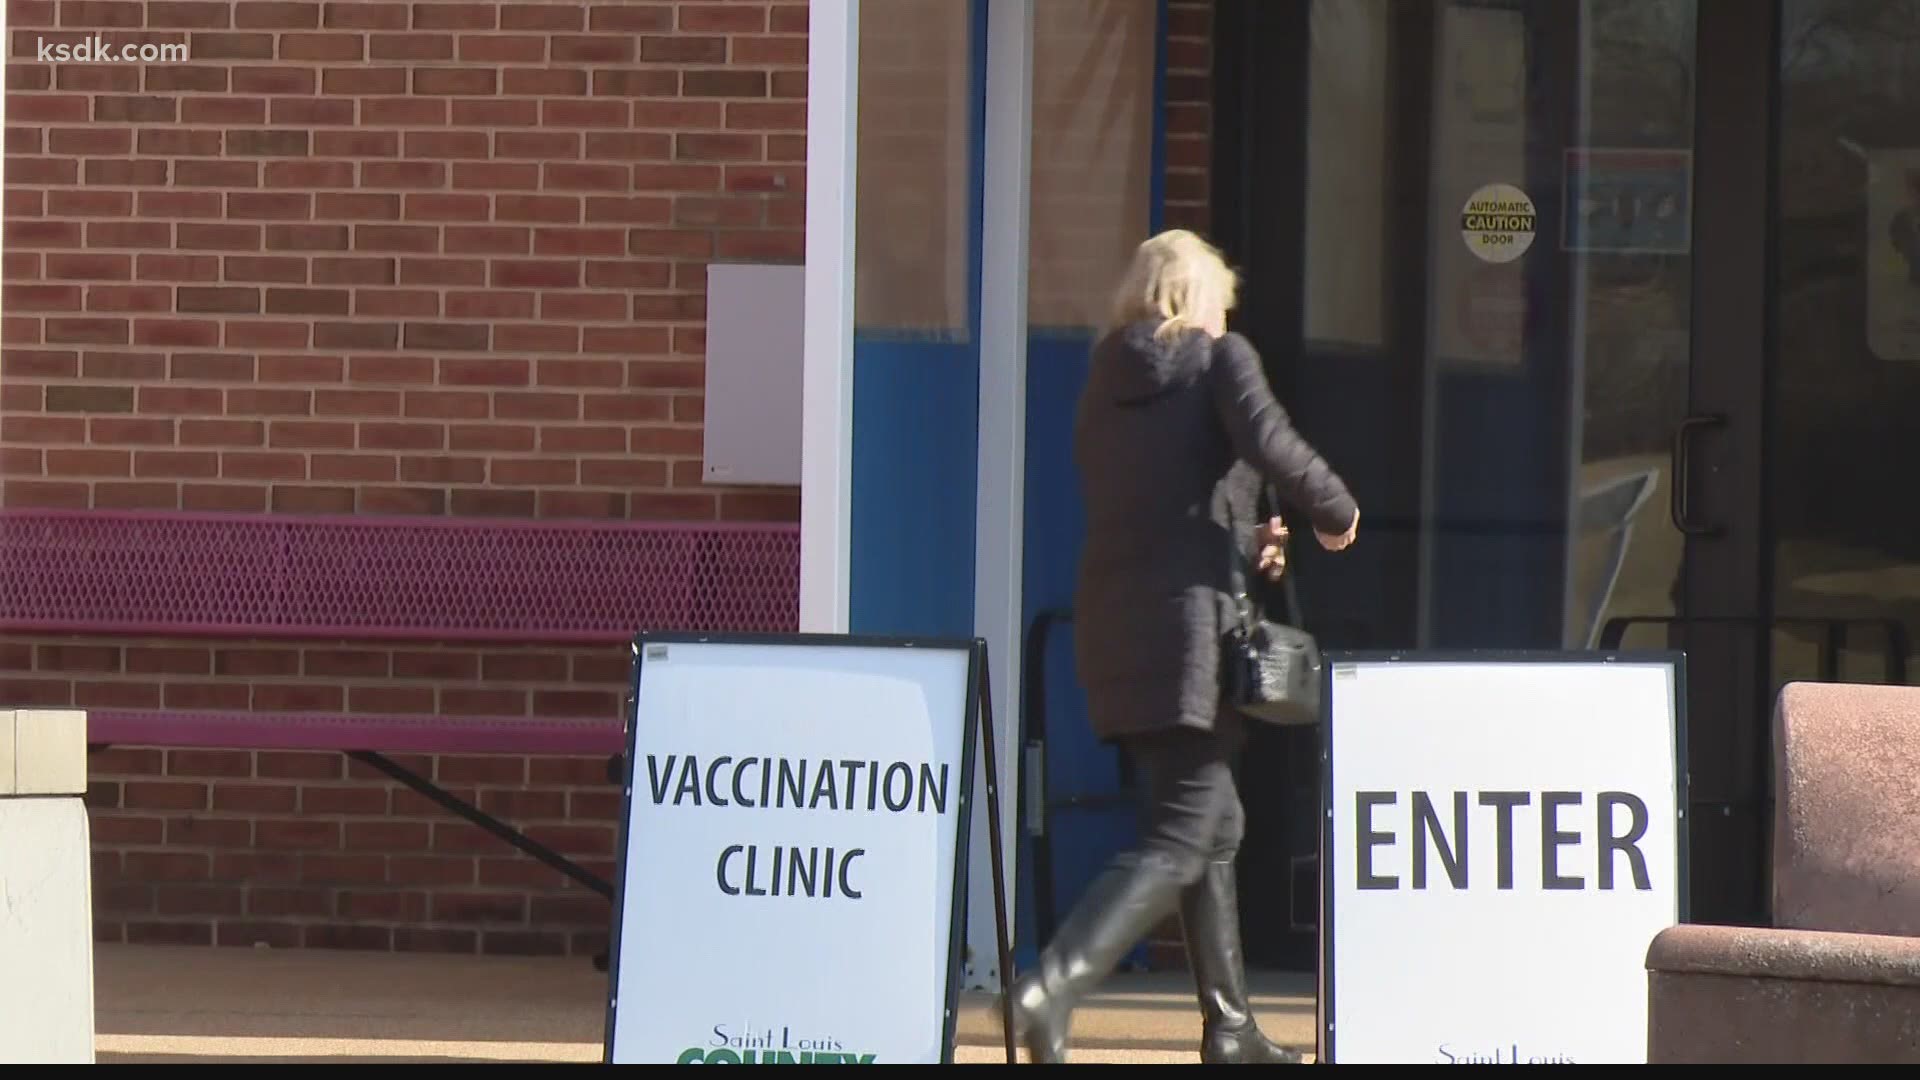 About 12% of Jefferson County residents who are 65 and older are fully vaccinated, the county said